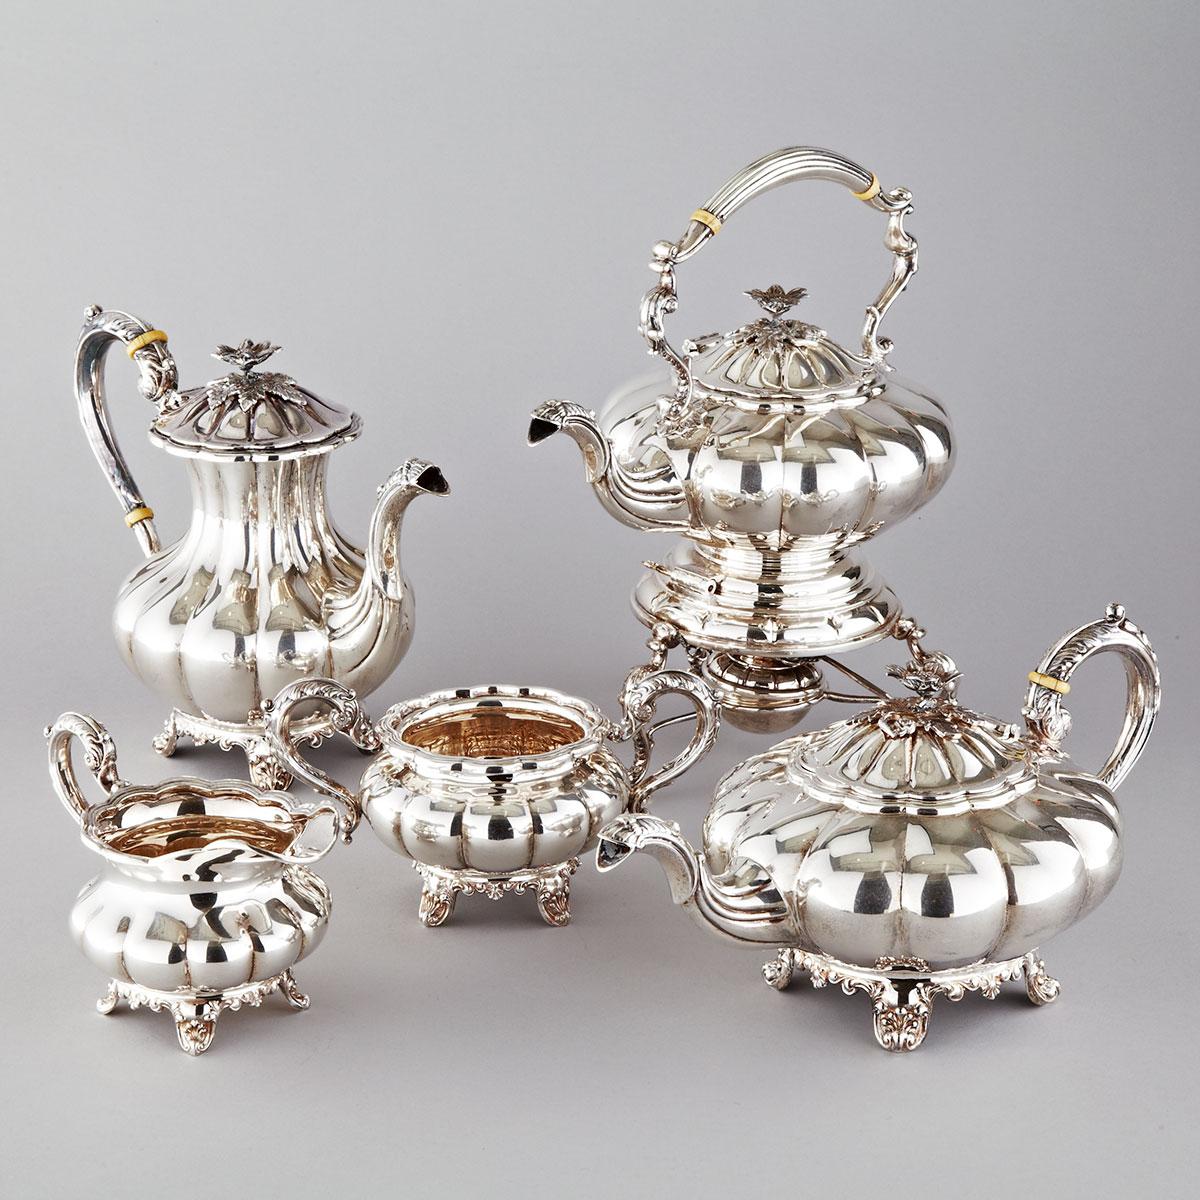 Canadian Silver Melon-Fluted Tea and Coffee Service, Henry Birks & Sons, Montreal, Que., 1965-71